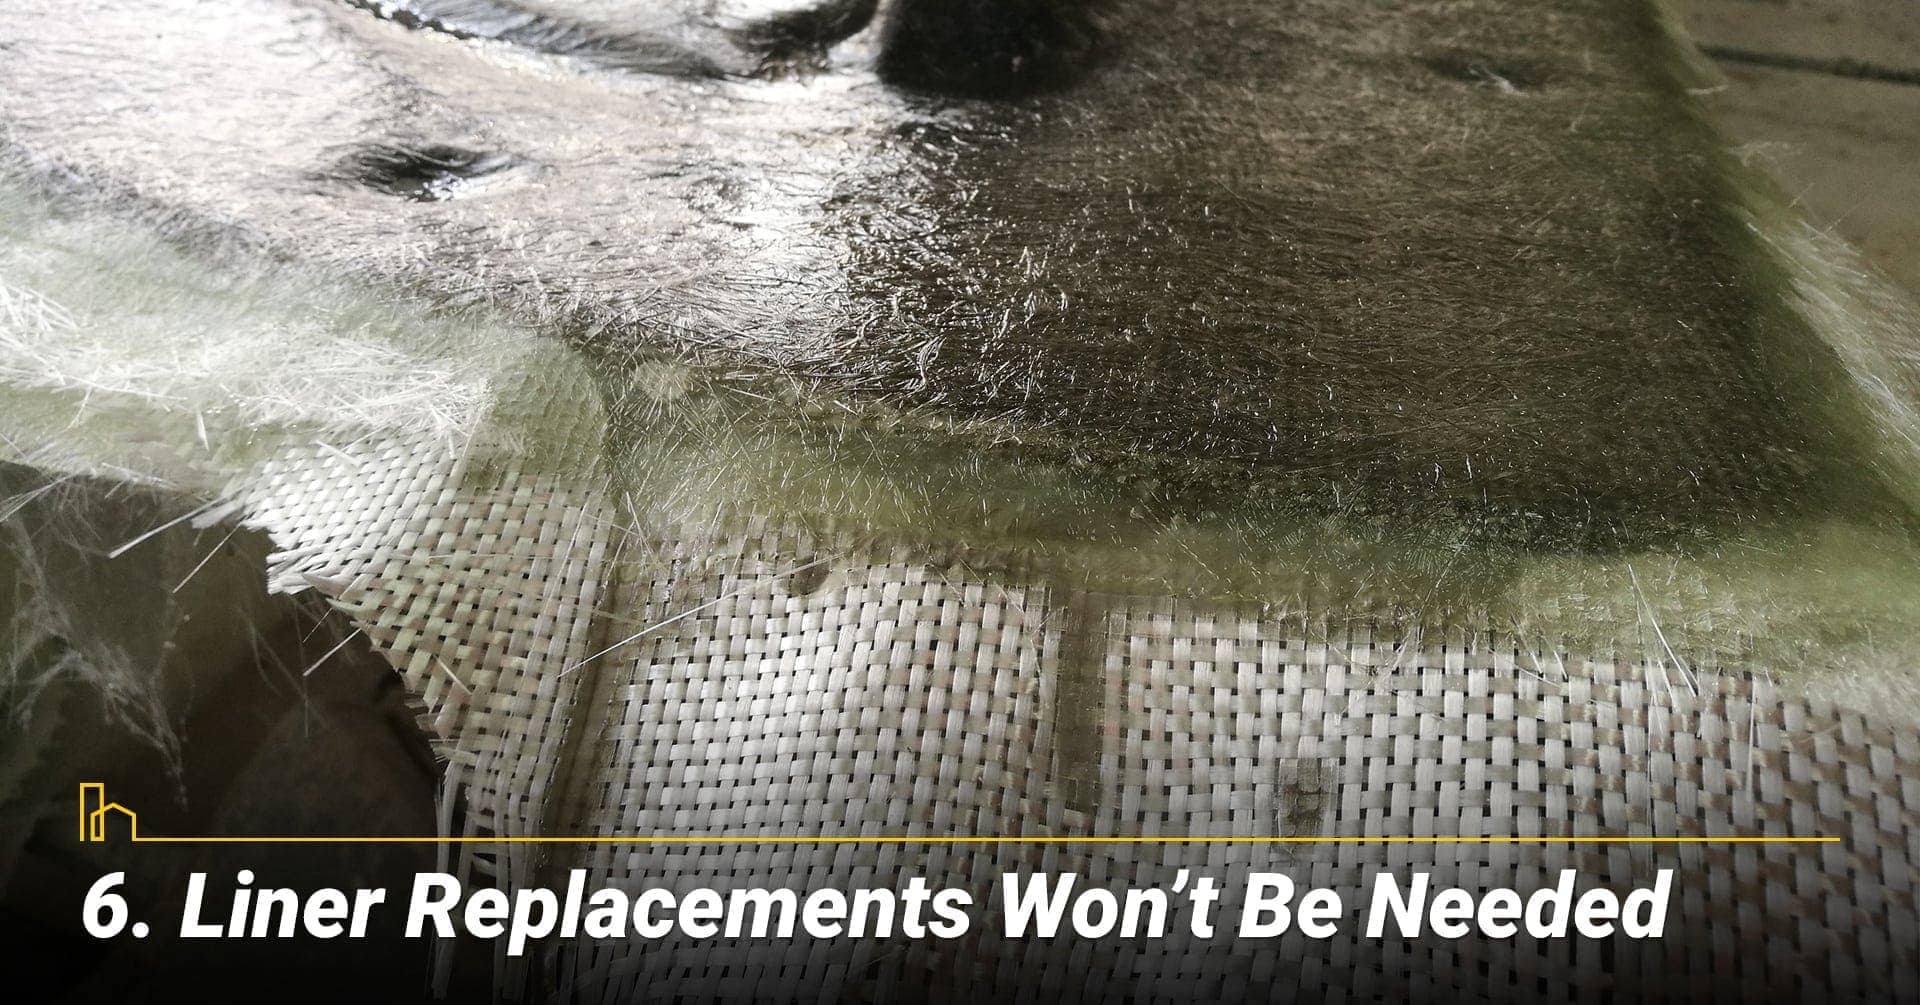 Liner Replacements Won’t Be Needed, no more liner